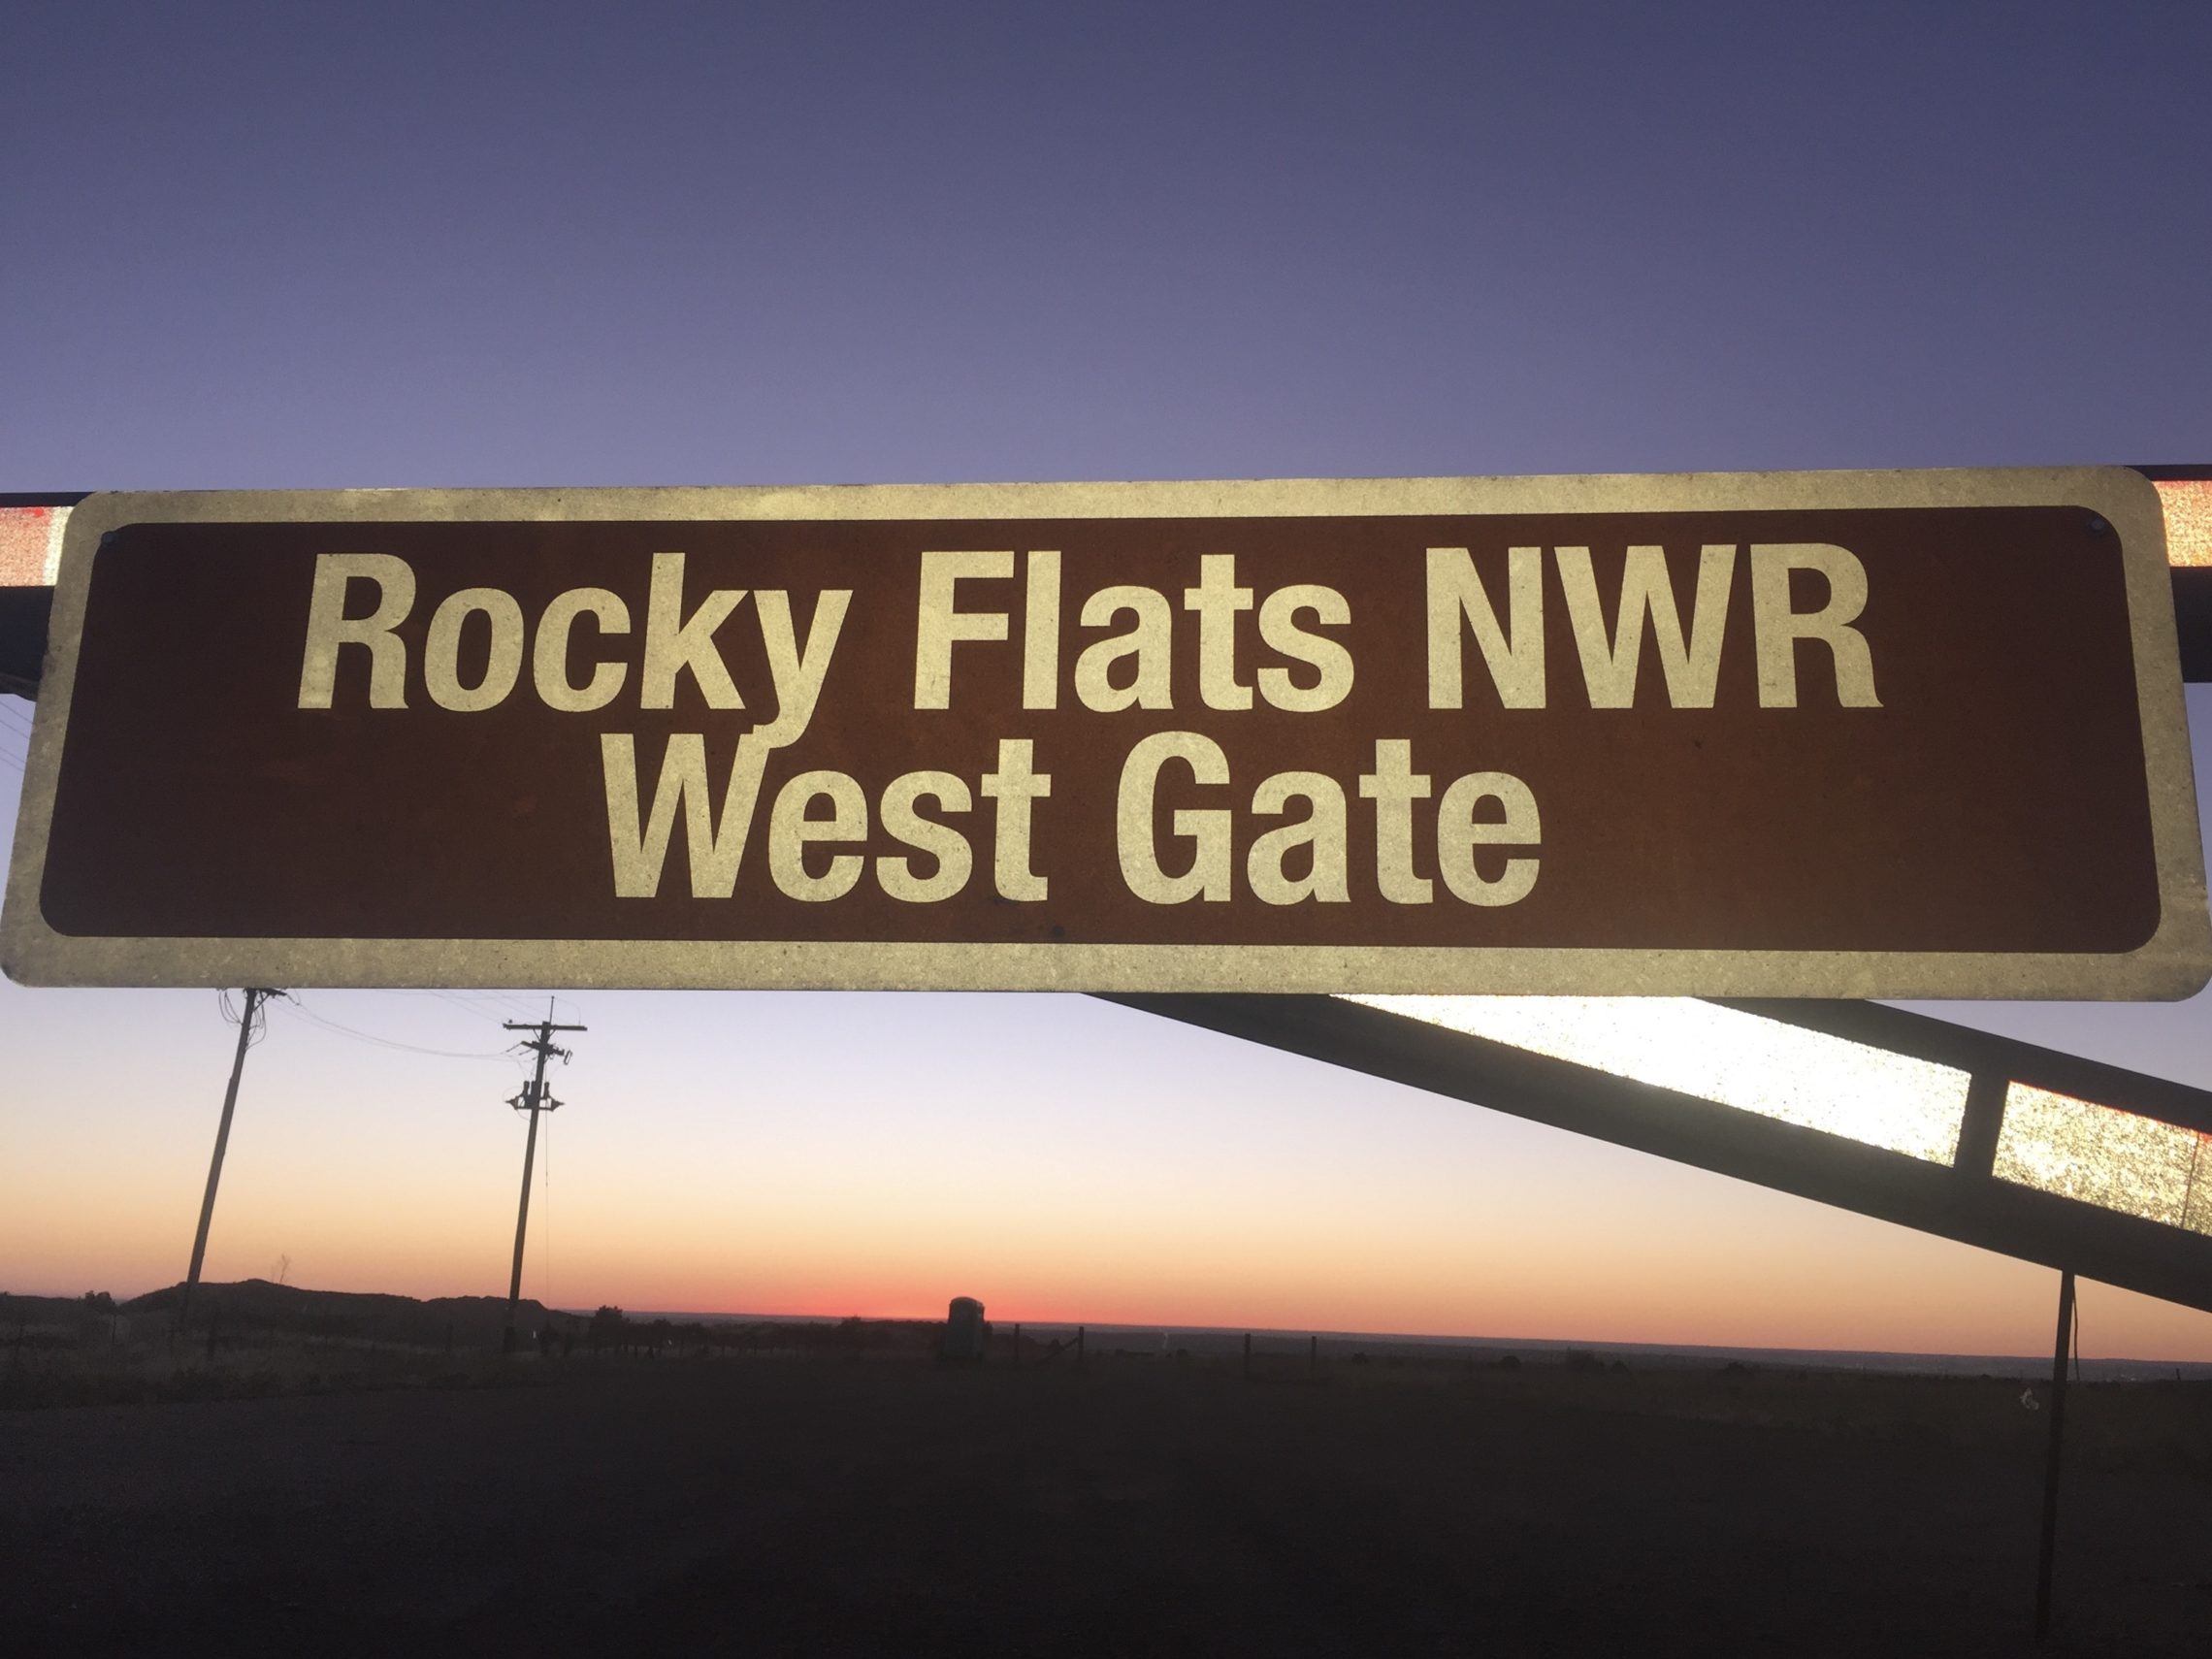 Rocky Flats National Wildlife Refuge sits on land surrounding the famous Rocky Flats Nuclear Reservation that produced nuclear weapons during the Cold War. CREDIT: DAN BOYCE/NPR